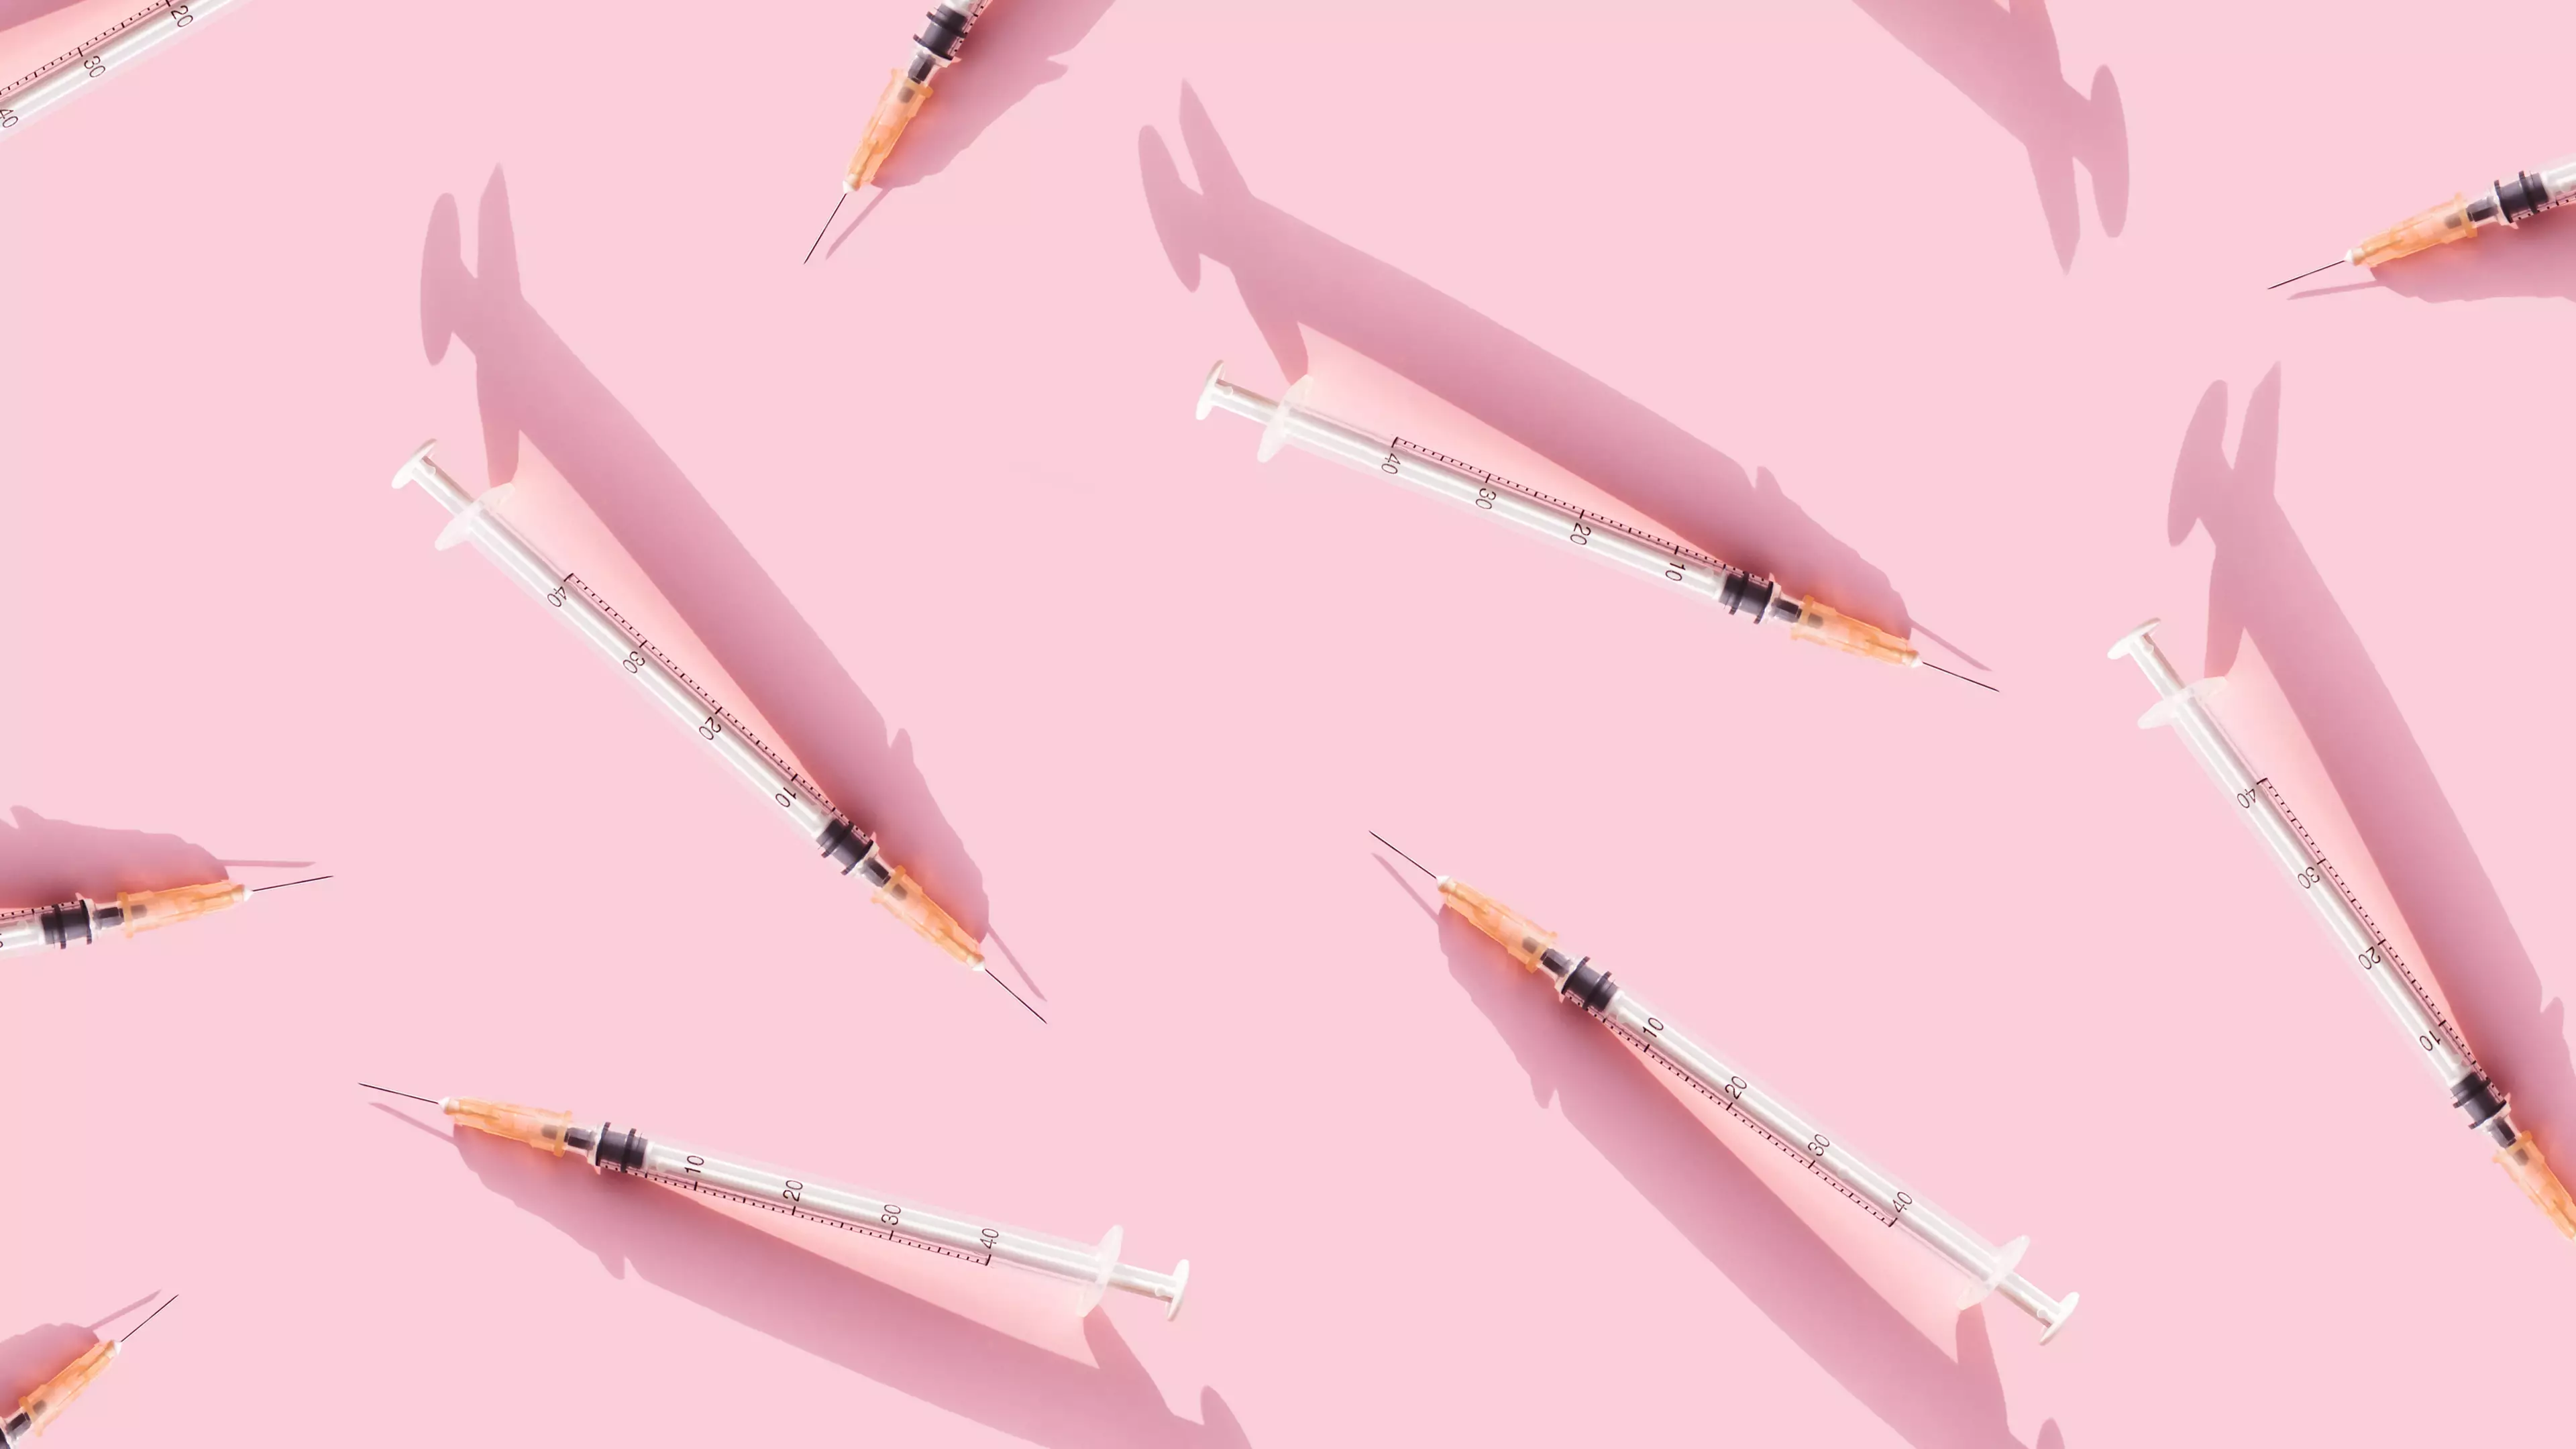 New Law To Make It Illegal To Give Botox And Fillers To Under-18s